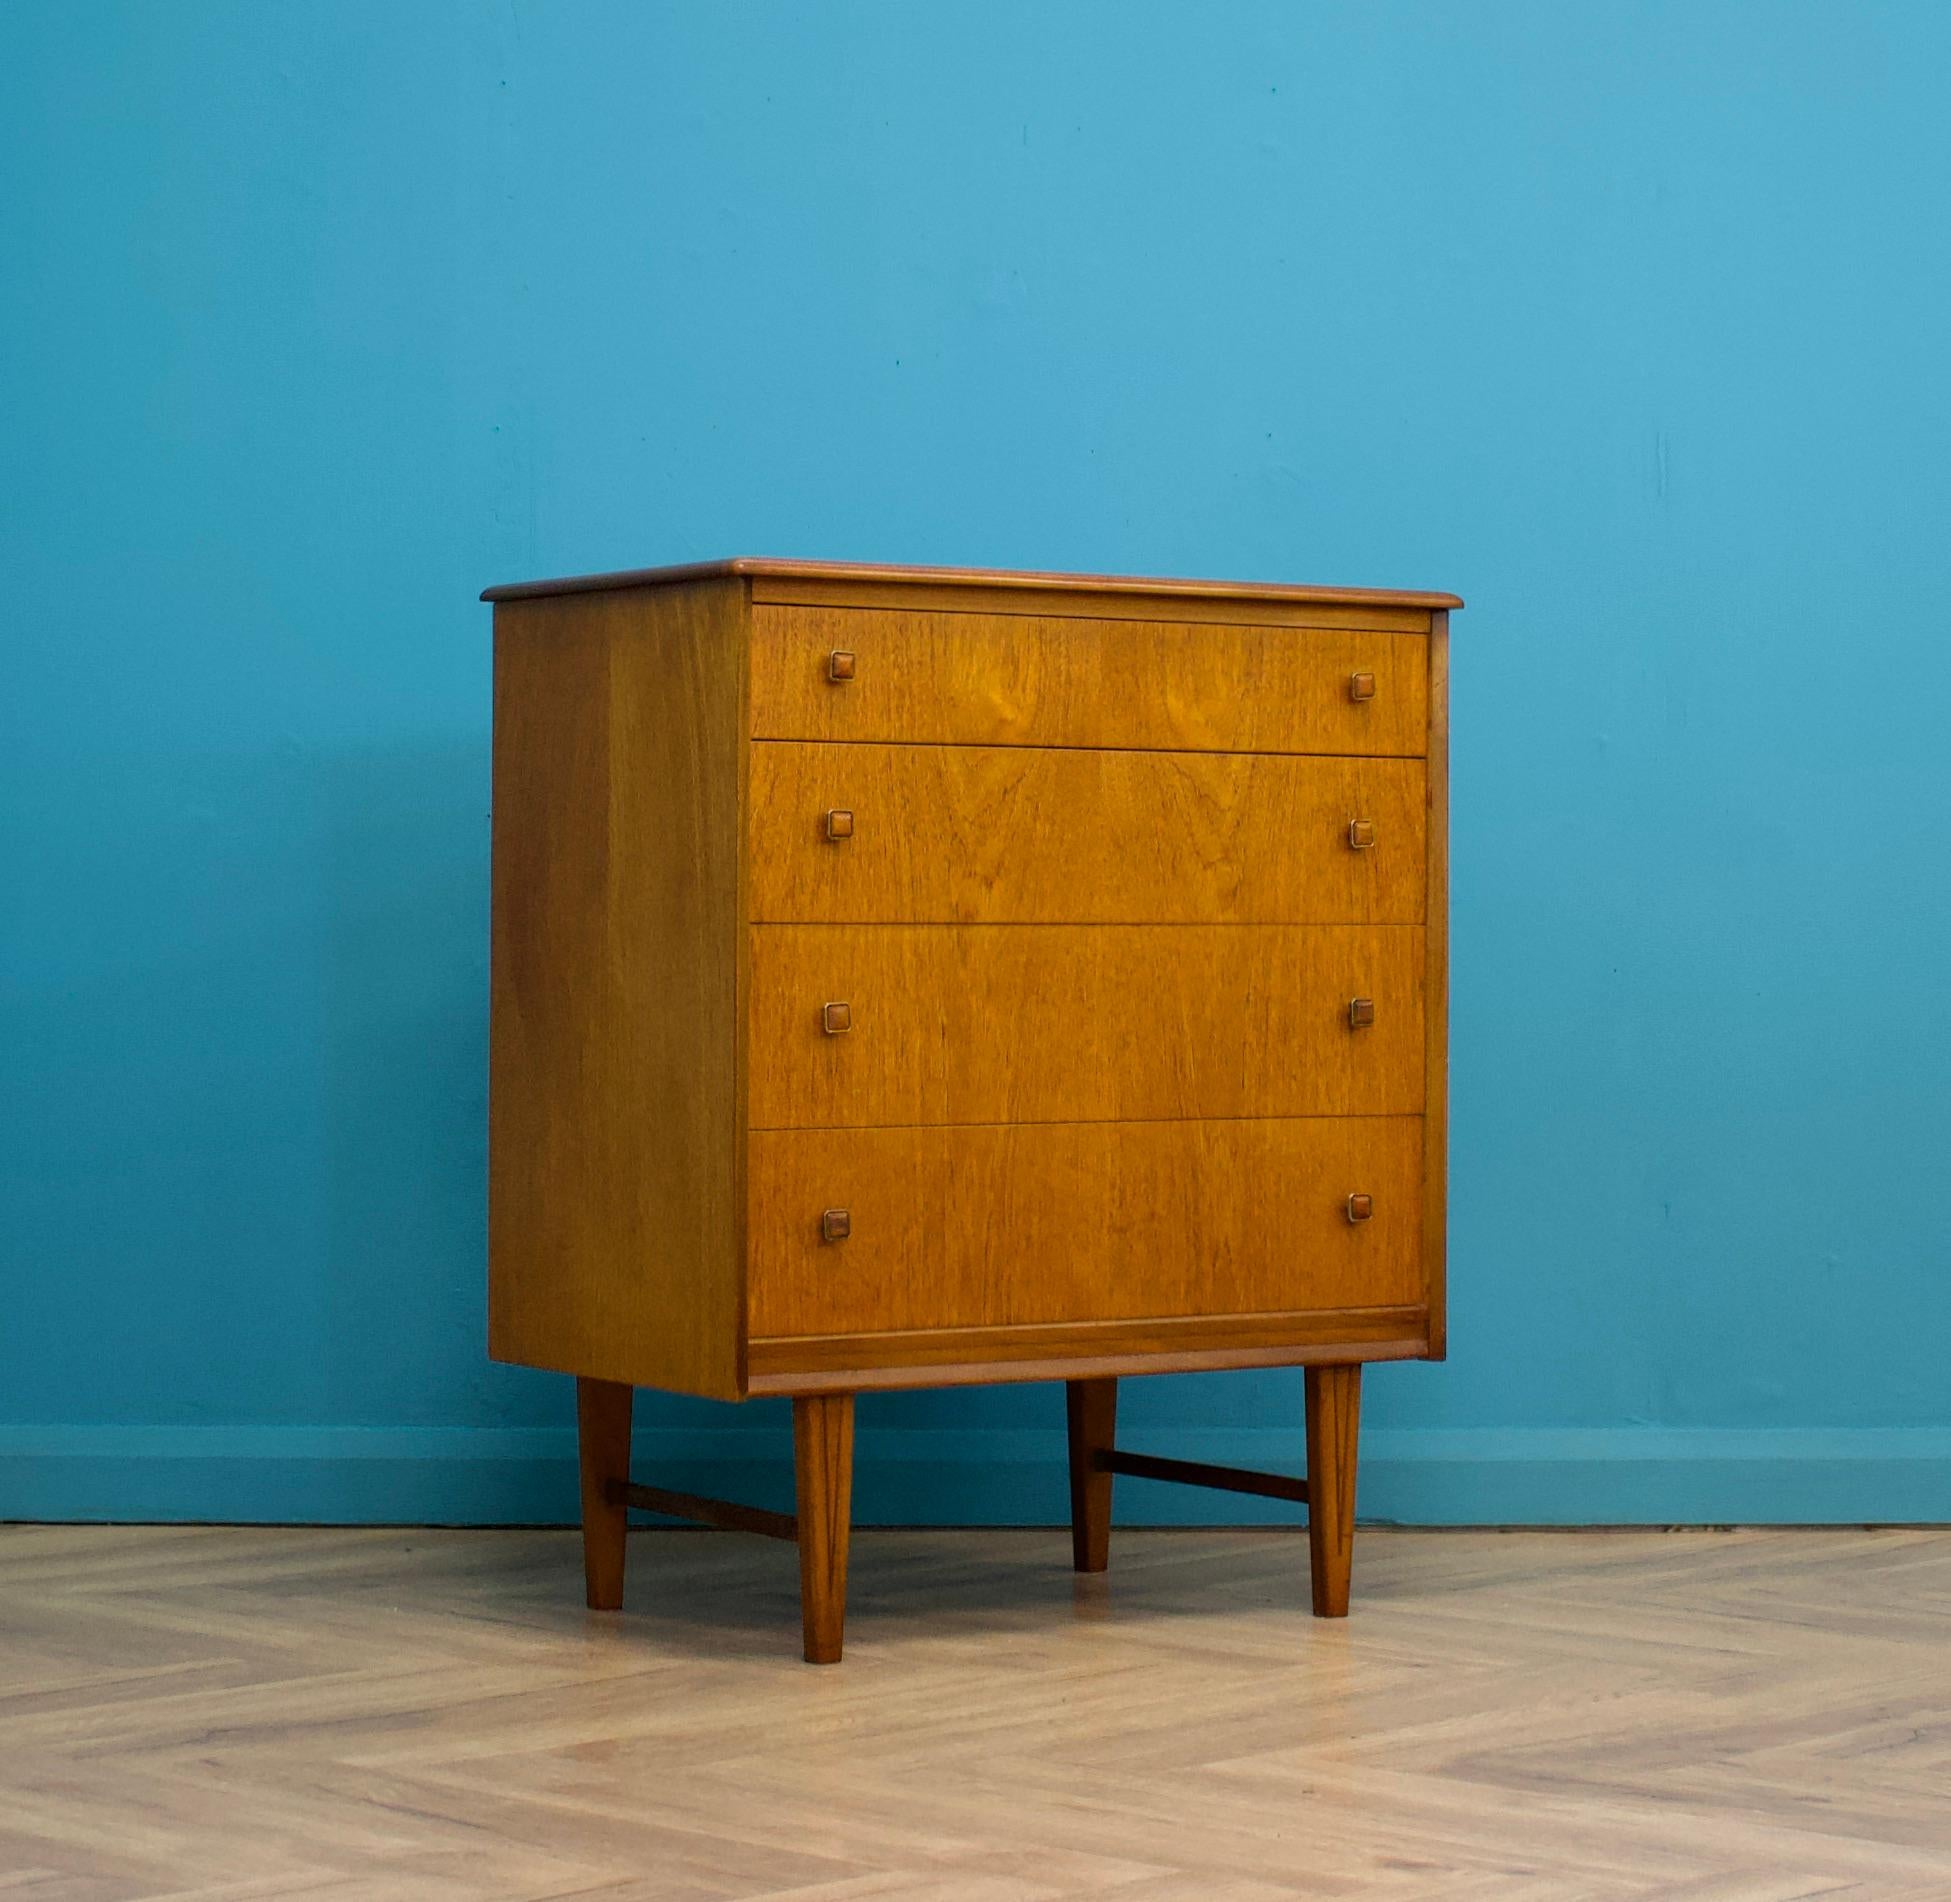 British Mid-Century Teak Chest of Drawers from Homeworthy, 1970s For Sale